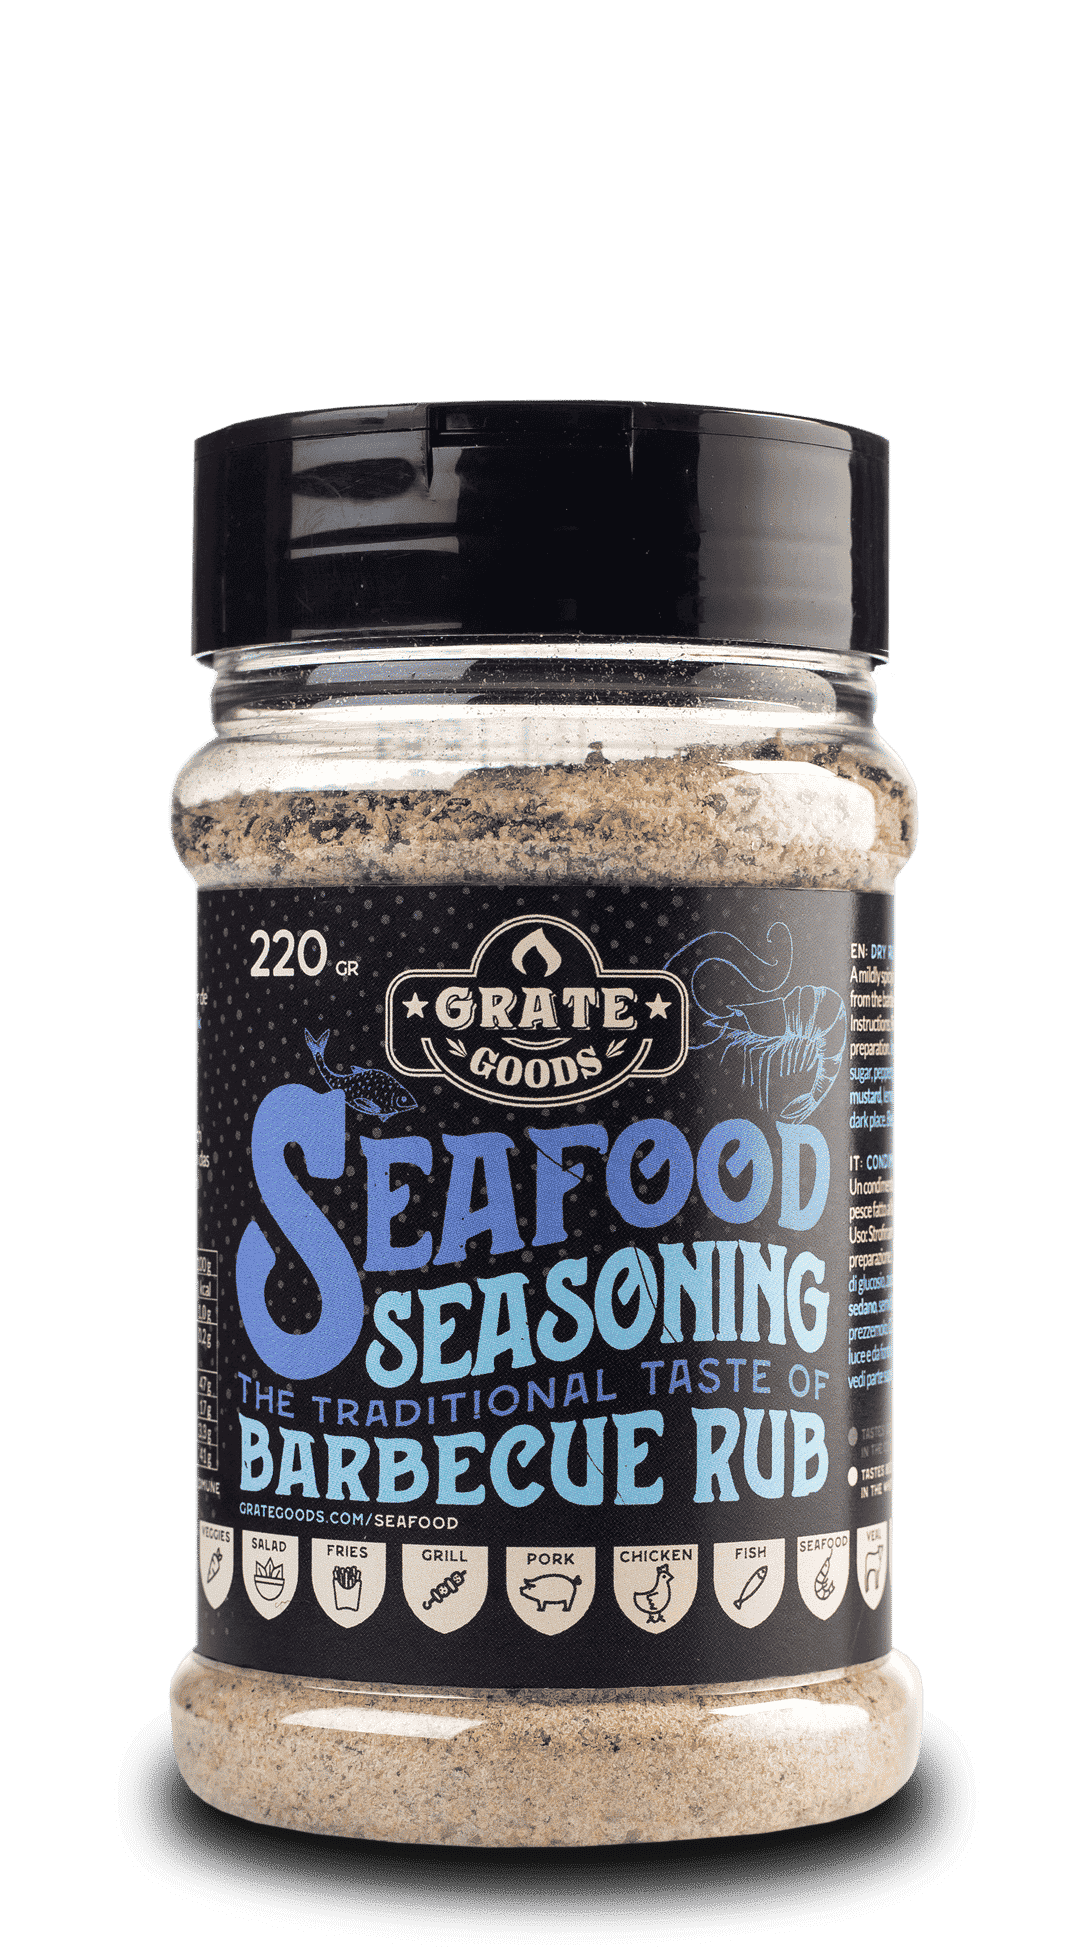 https://www.grategoods.com/wp-content/uploads/2021/02/Barbecue-Rub-Seafood-Seasoning.png